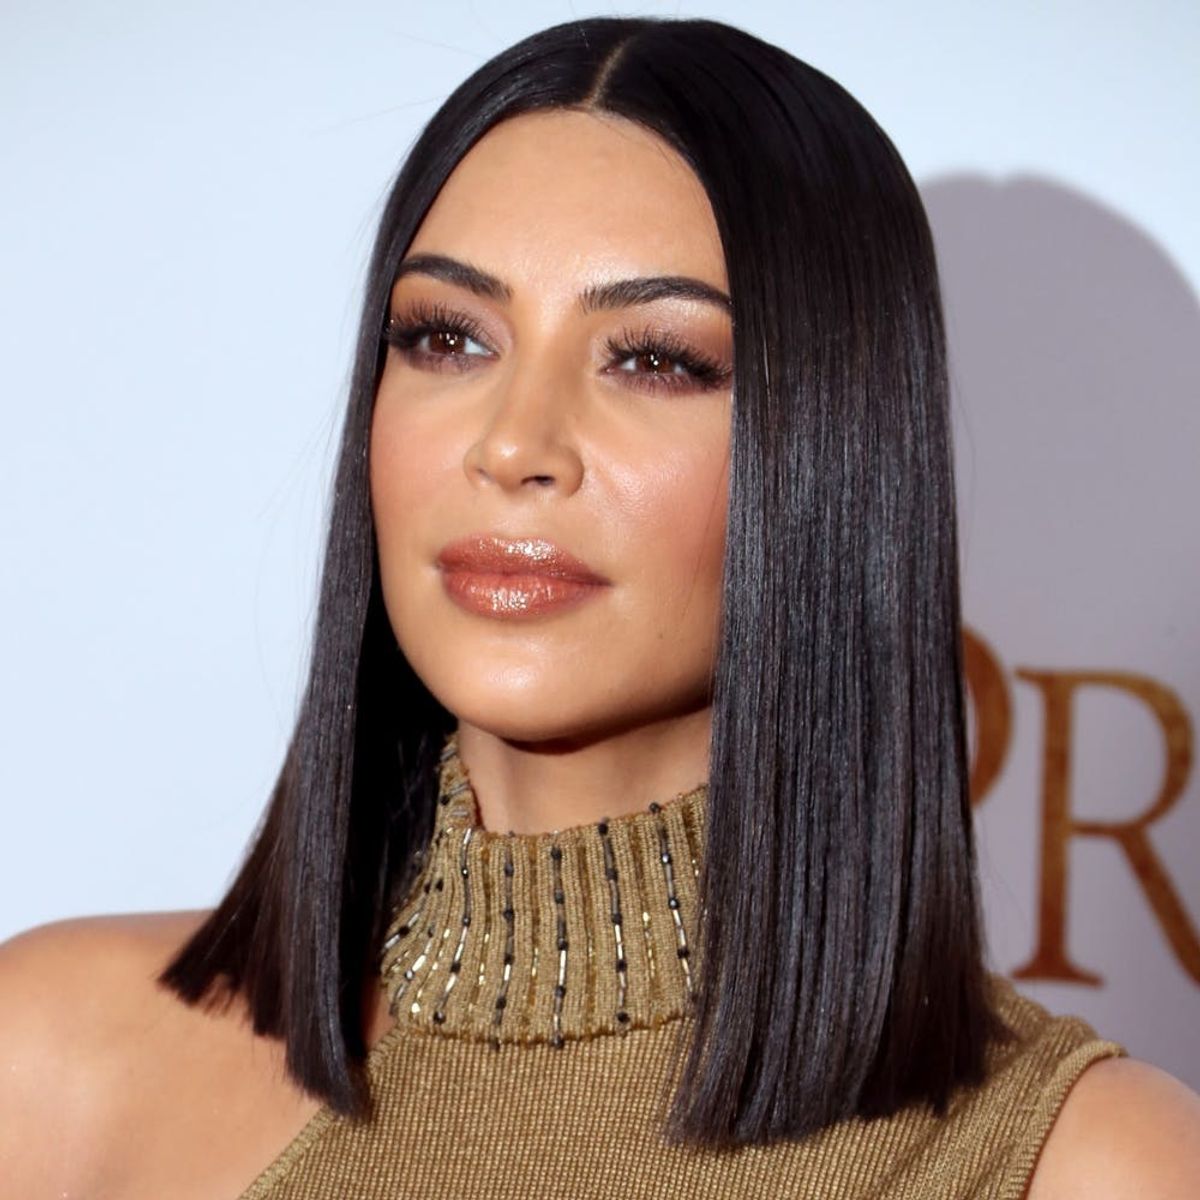 People Are Mad AF About the Brow-Raising Merch Kim Kardashian West Just Dropped